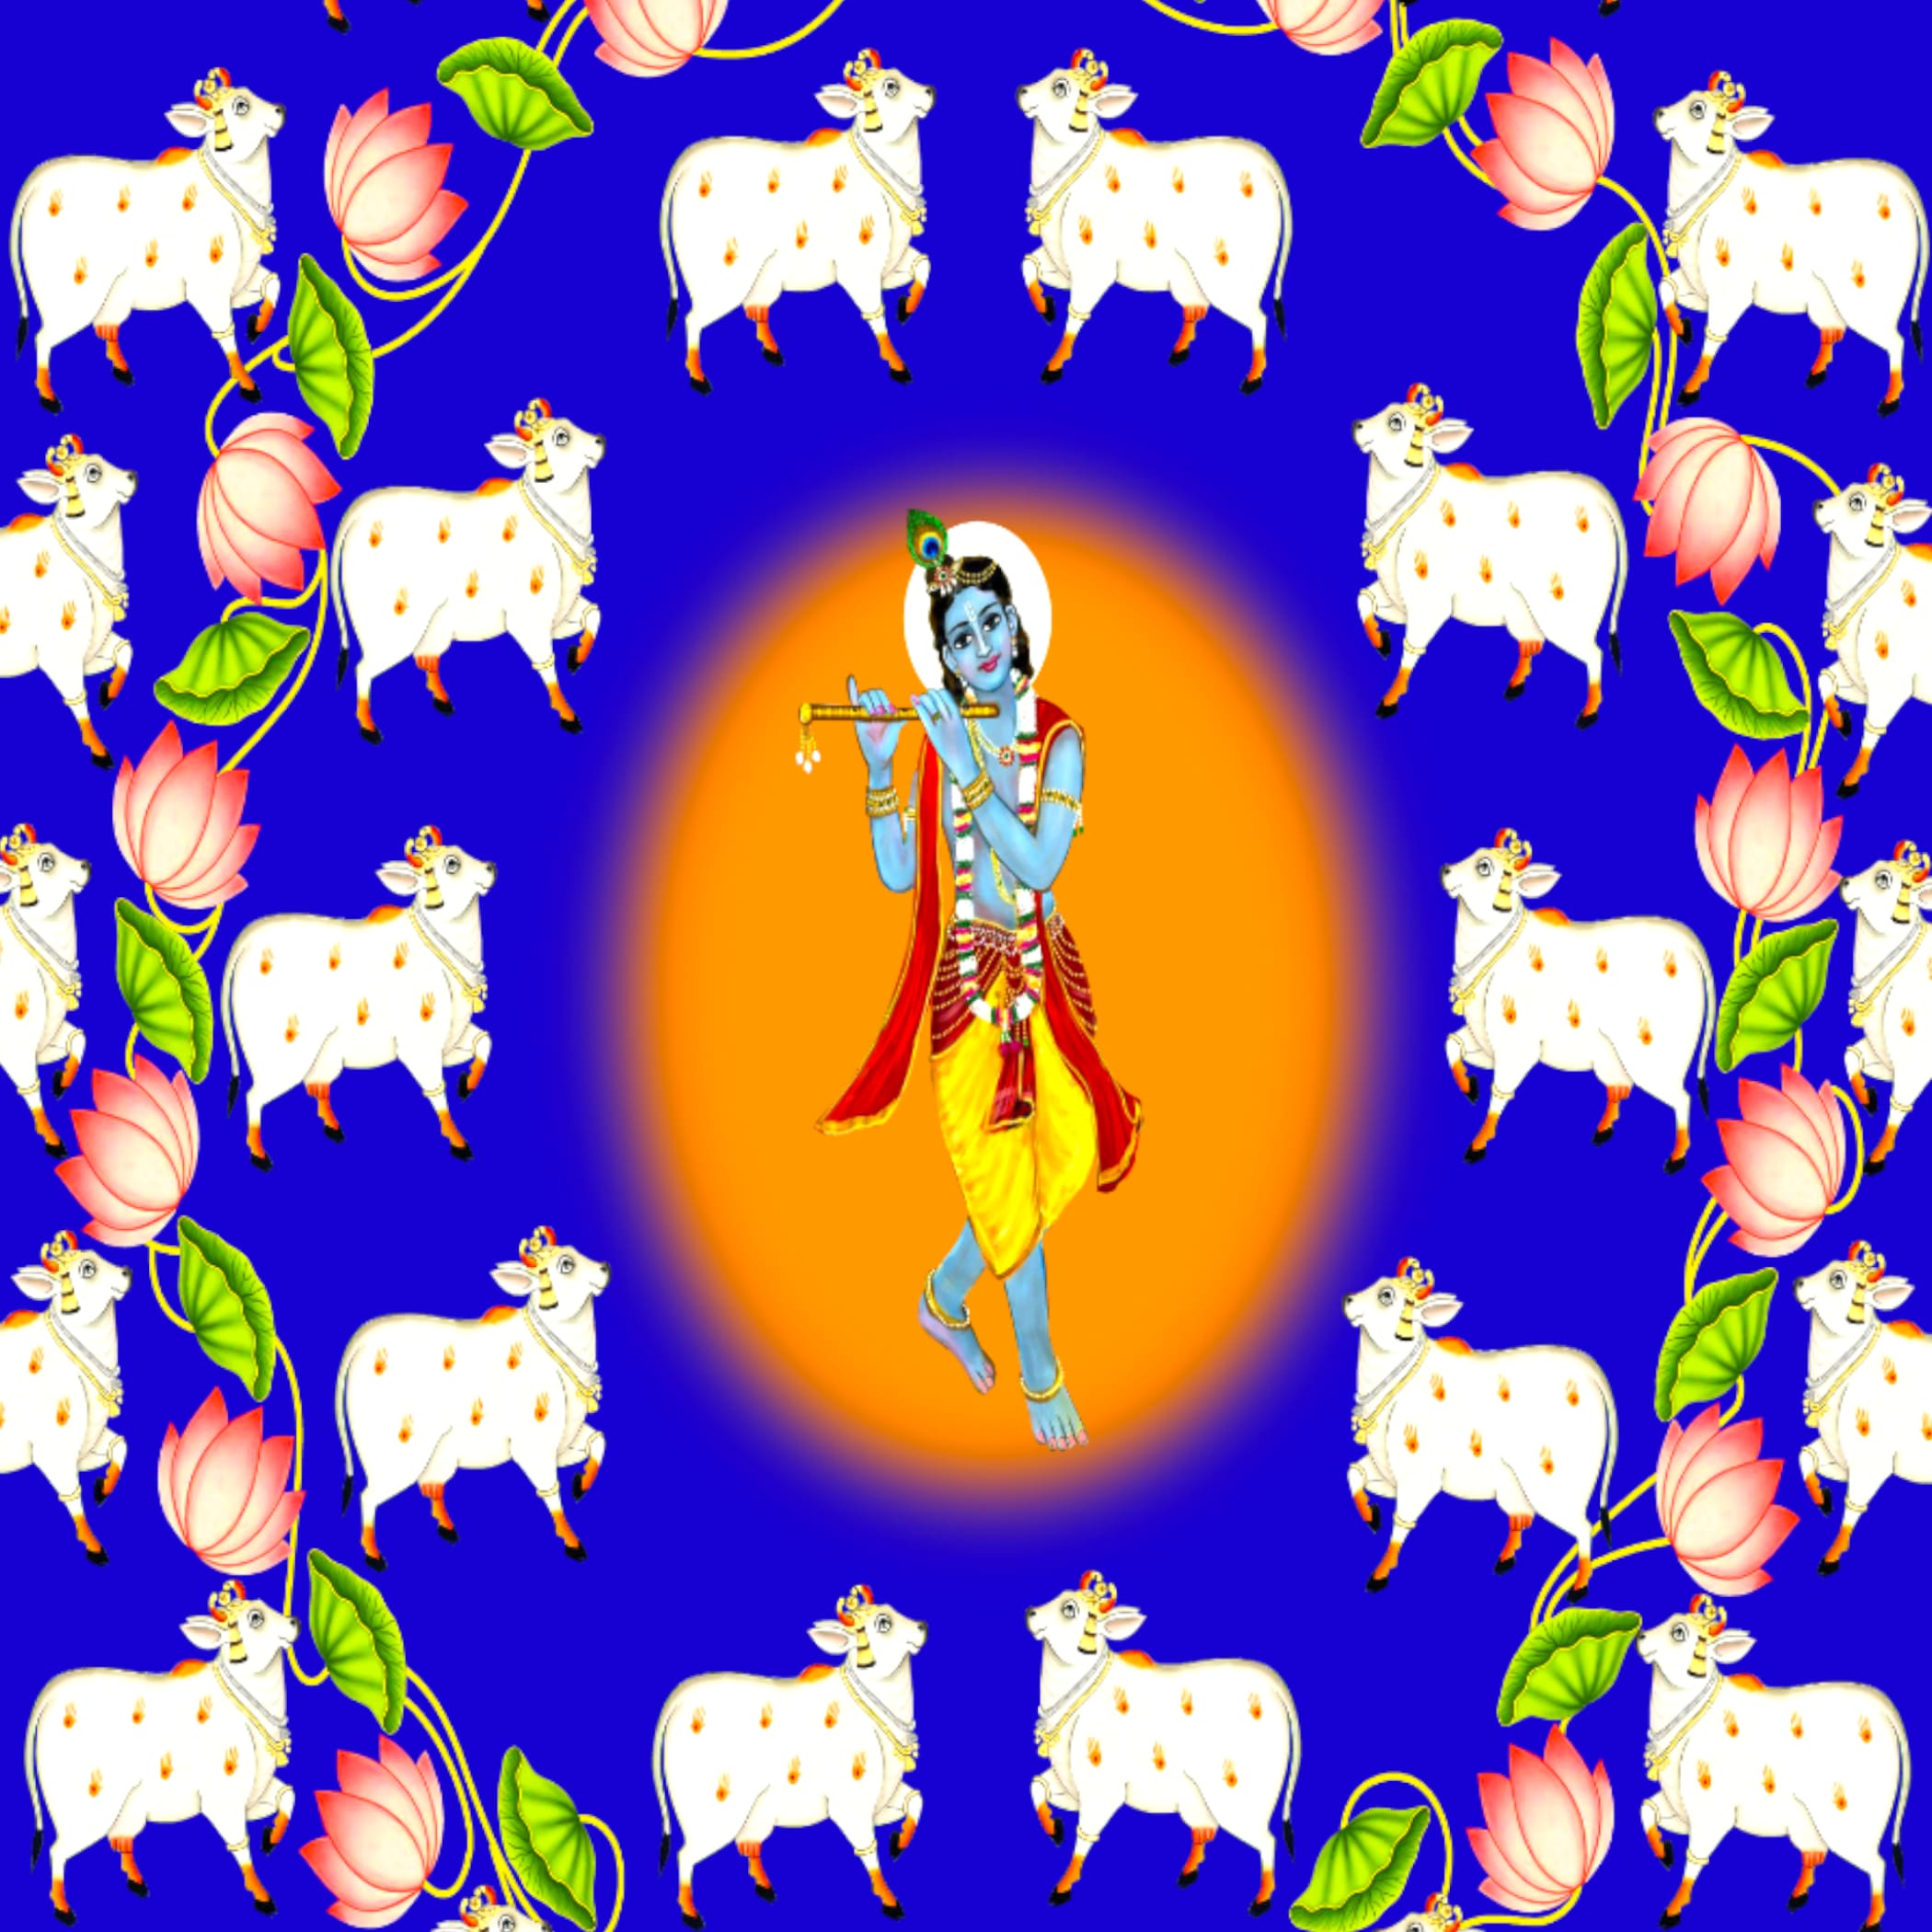 Lord krishna backdrop with cow indian traditional cloth